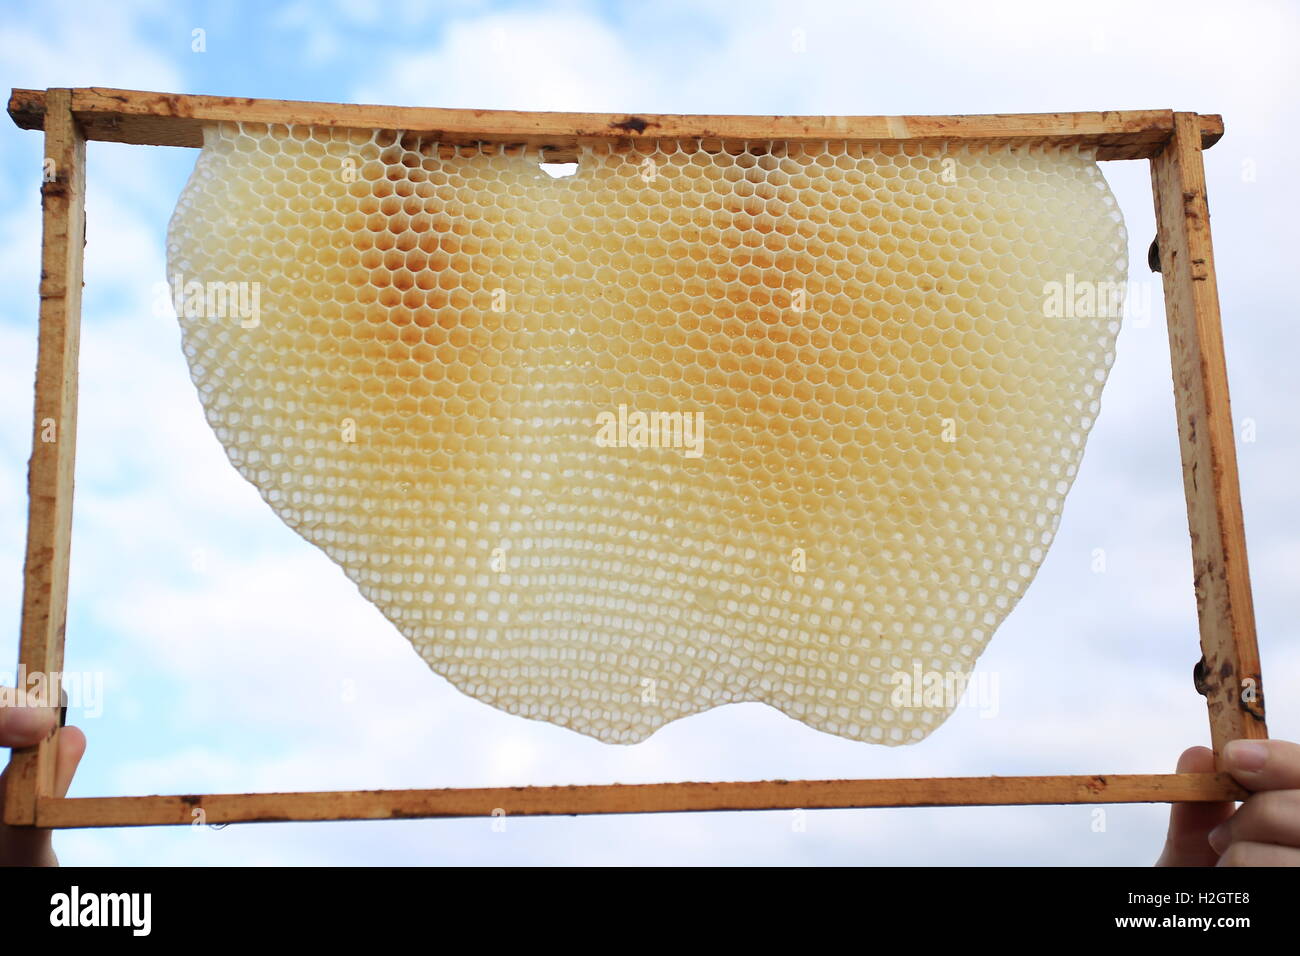 Frame with honeycomb made by European honey bee (Apis mellifera), from hive, Germany Stock Photo